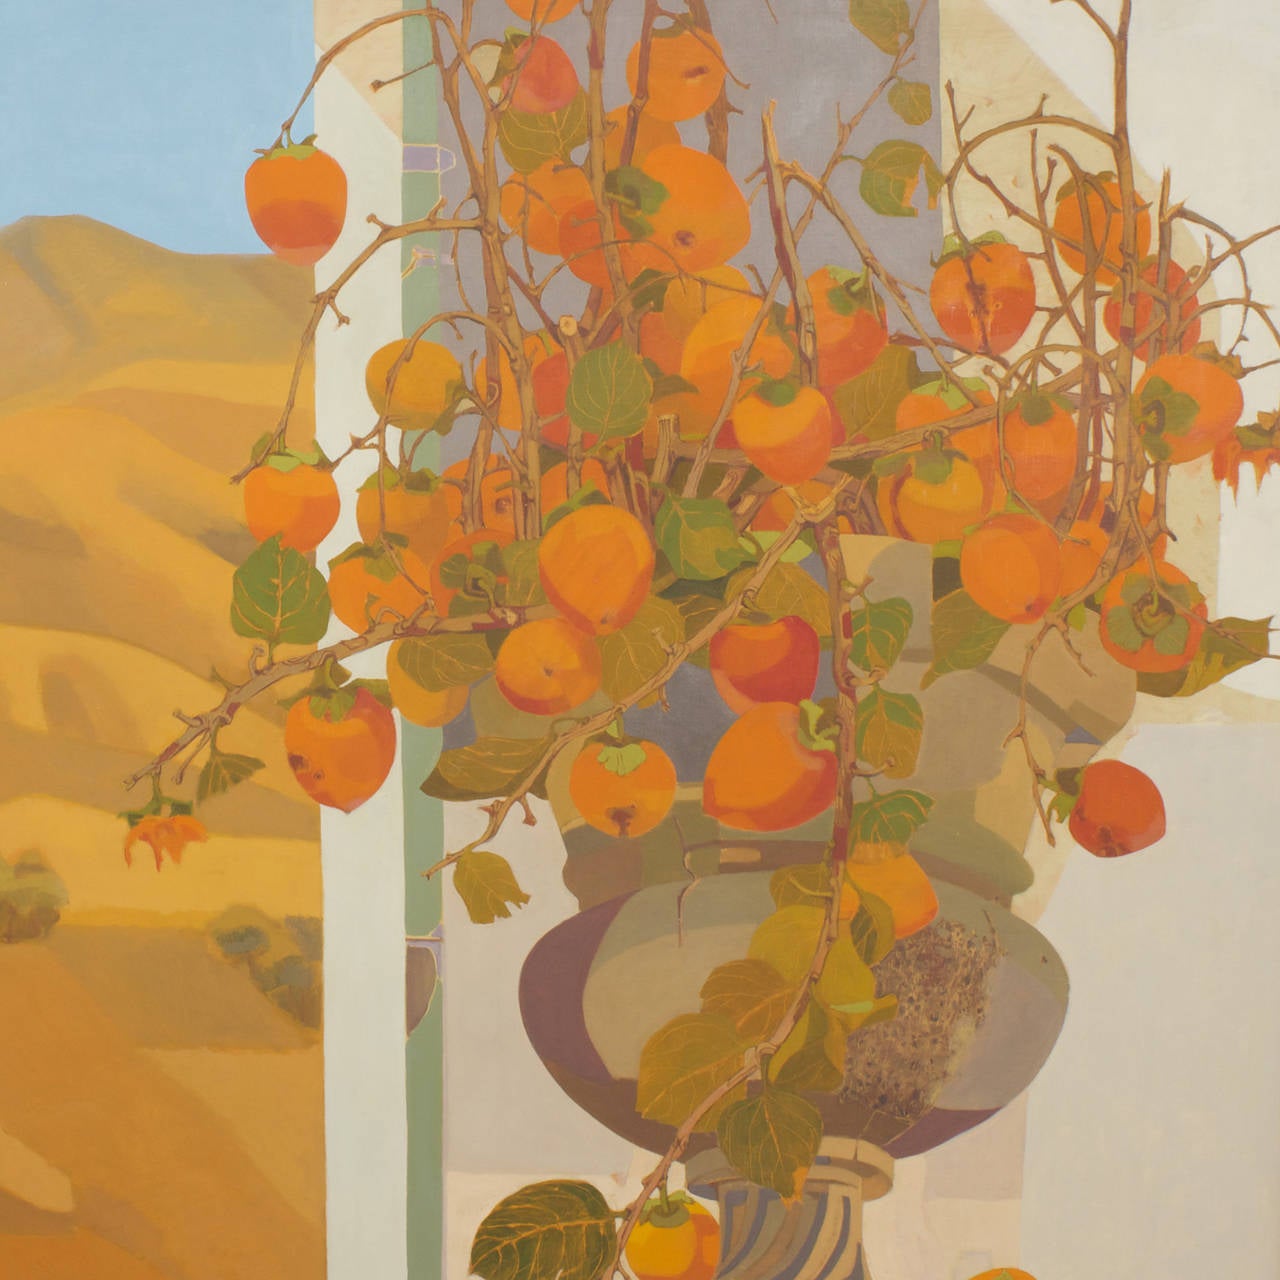 Here is a large modern painting that exudes positive vibrations and wraps itself around you like a hug. A simple still life with great presence and luscious warm colors, tells a story of a time and place without any complications. The fruit seems to